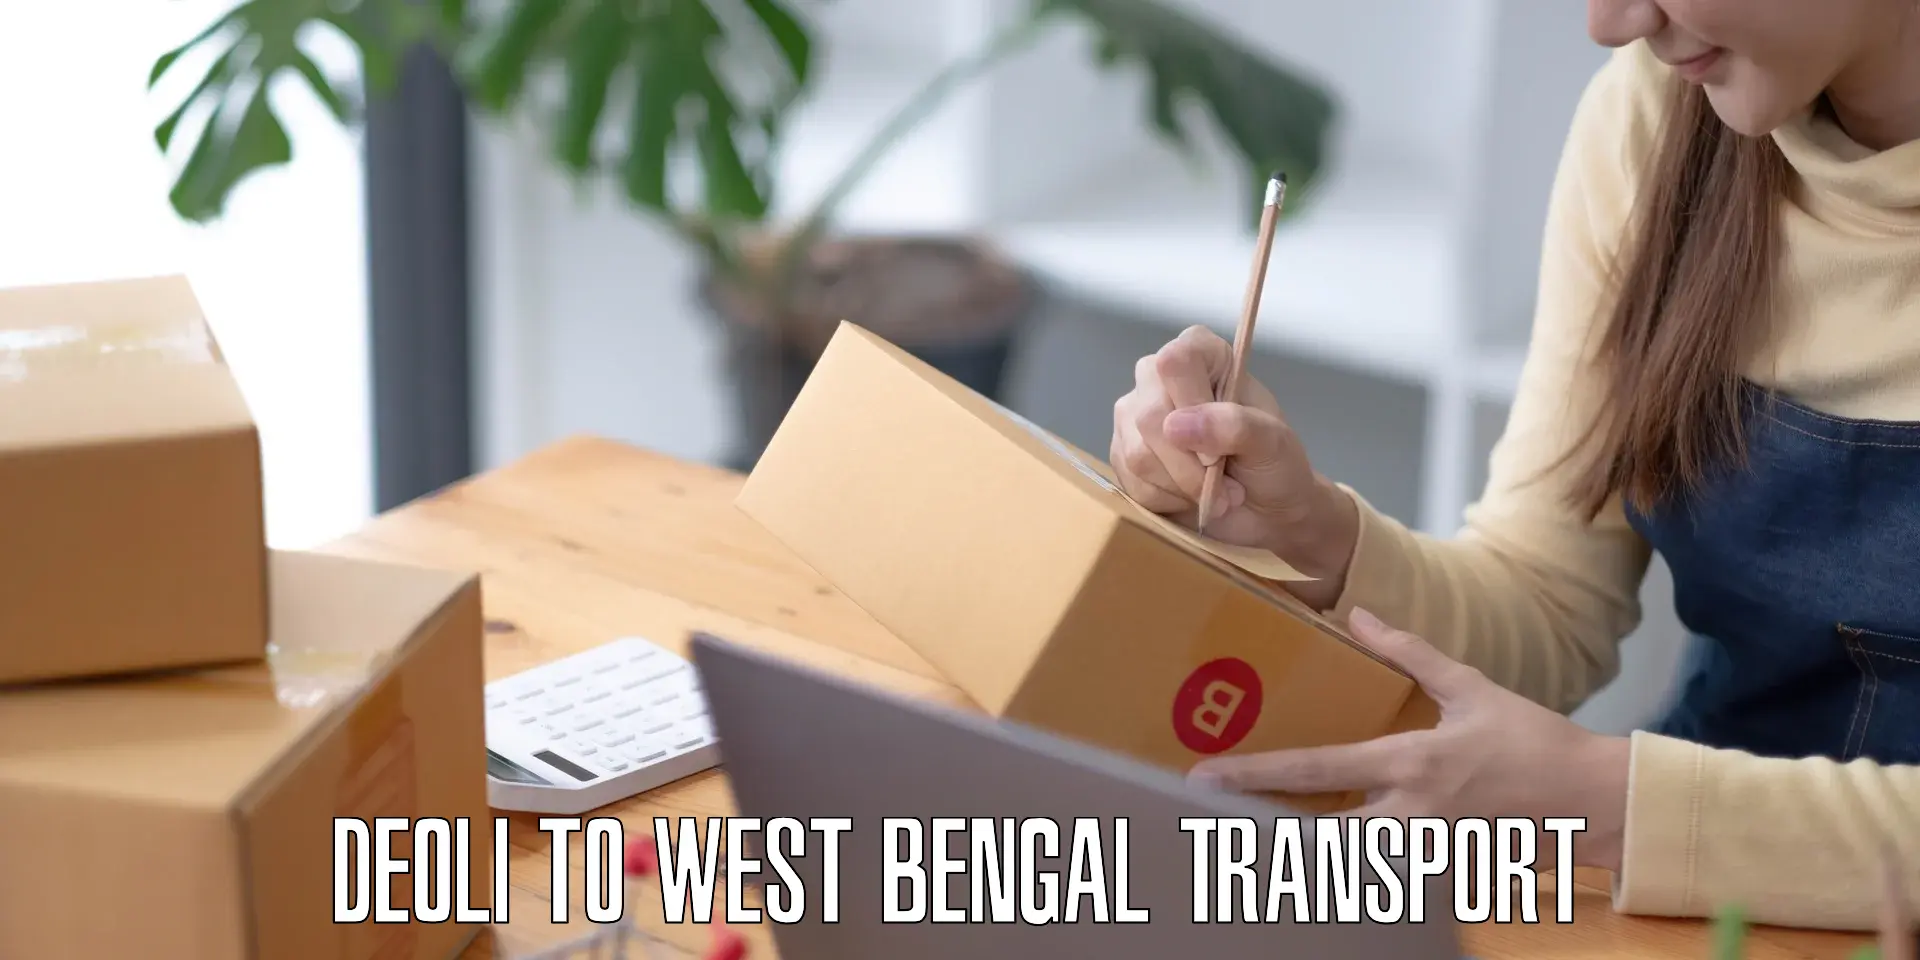 Container transport service Deoli to West Bengal